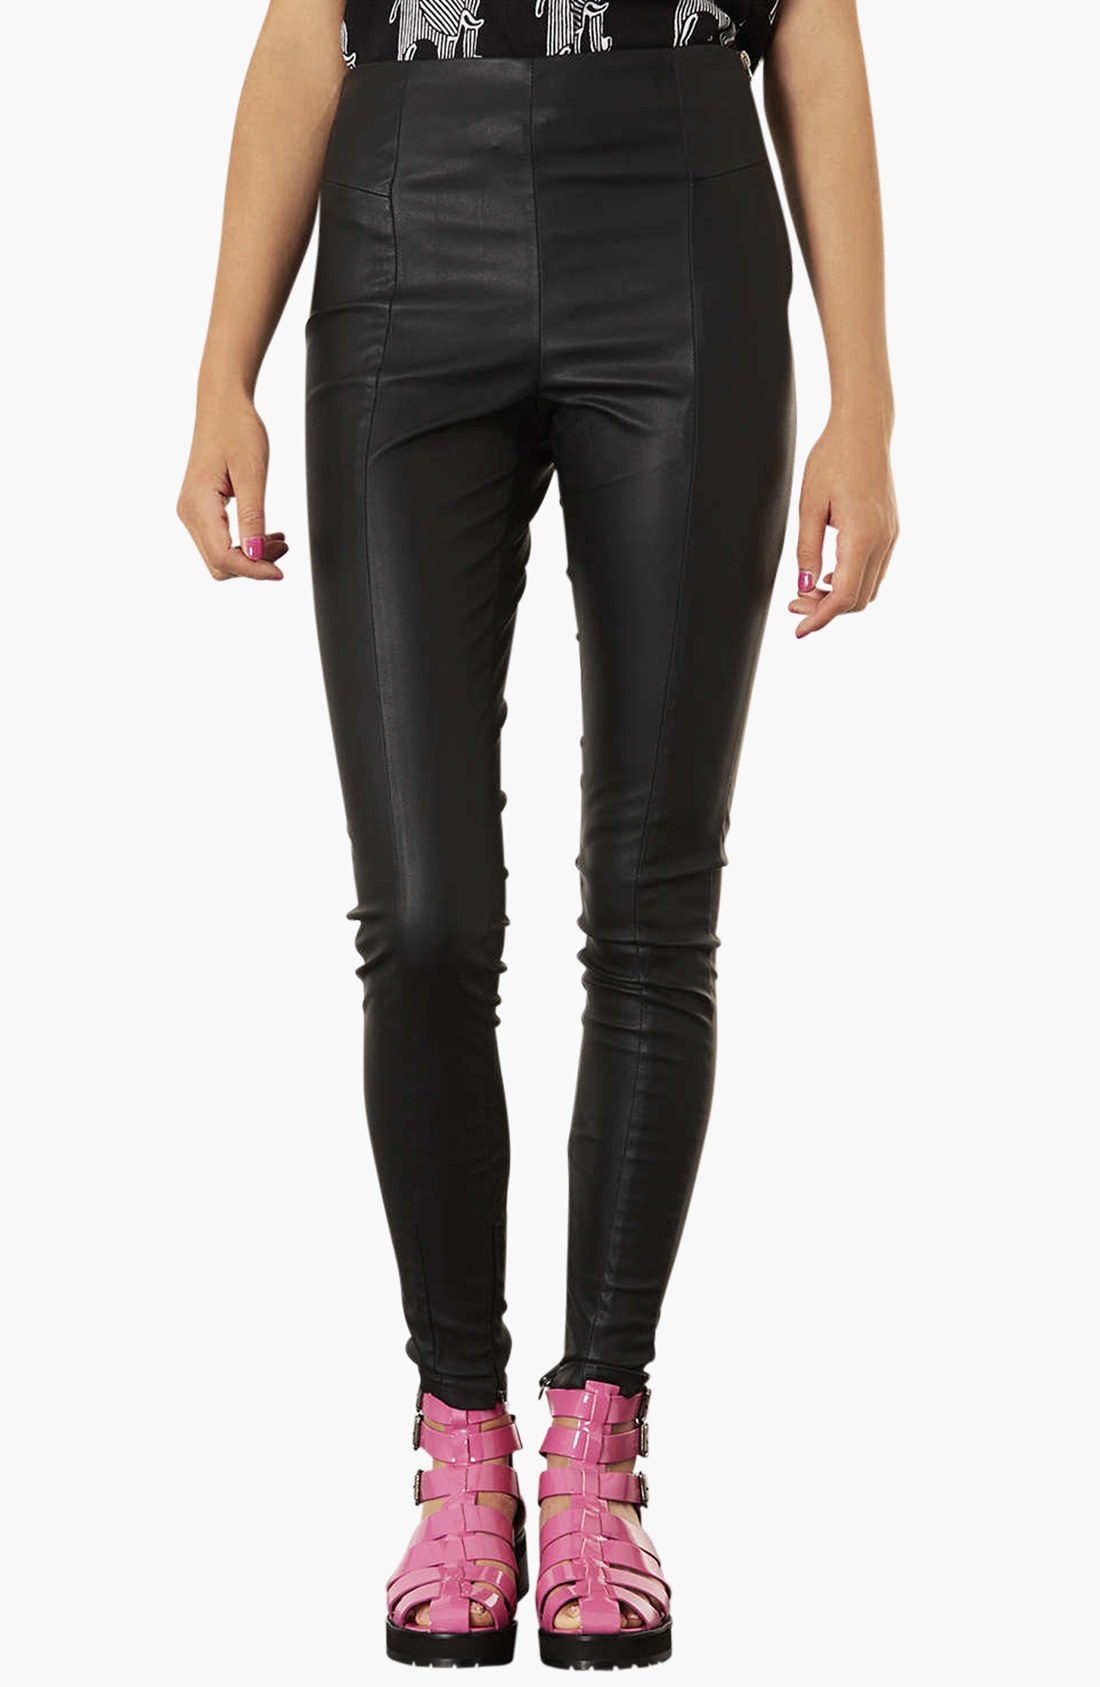 Topshop Faux Leather Seamed Leggings In Black Lyst 2471